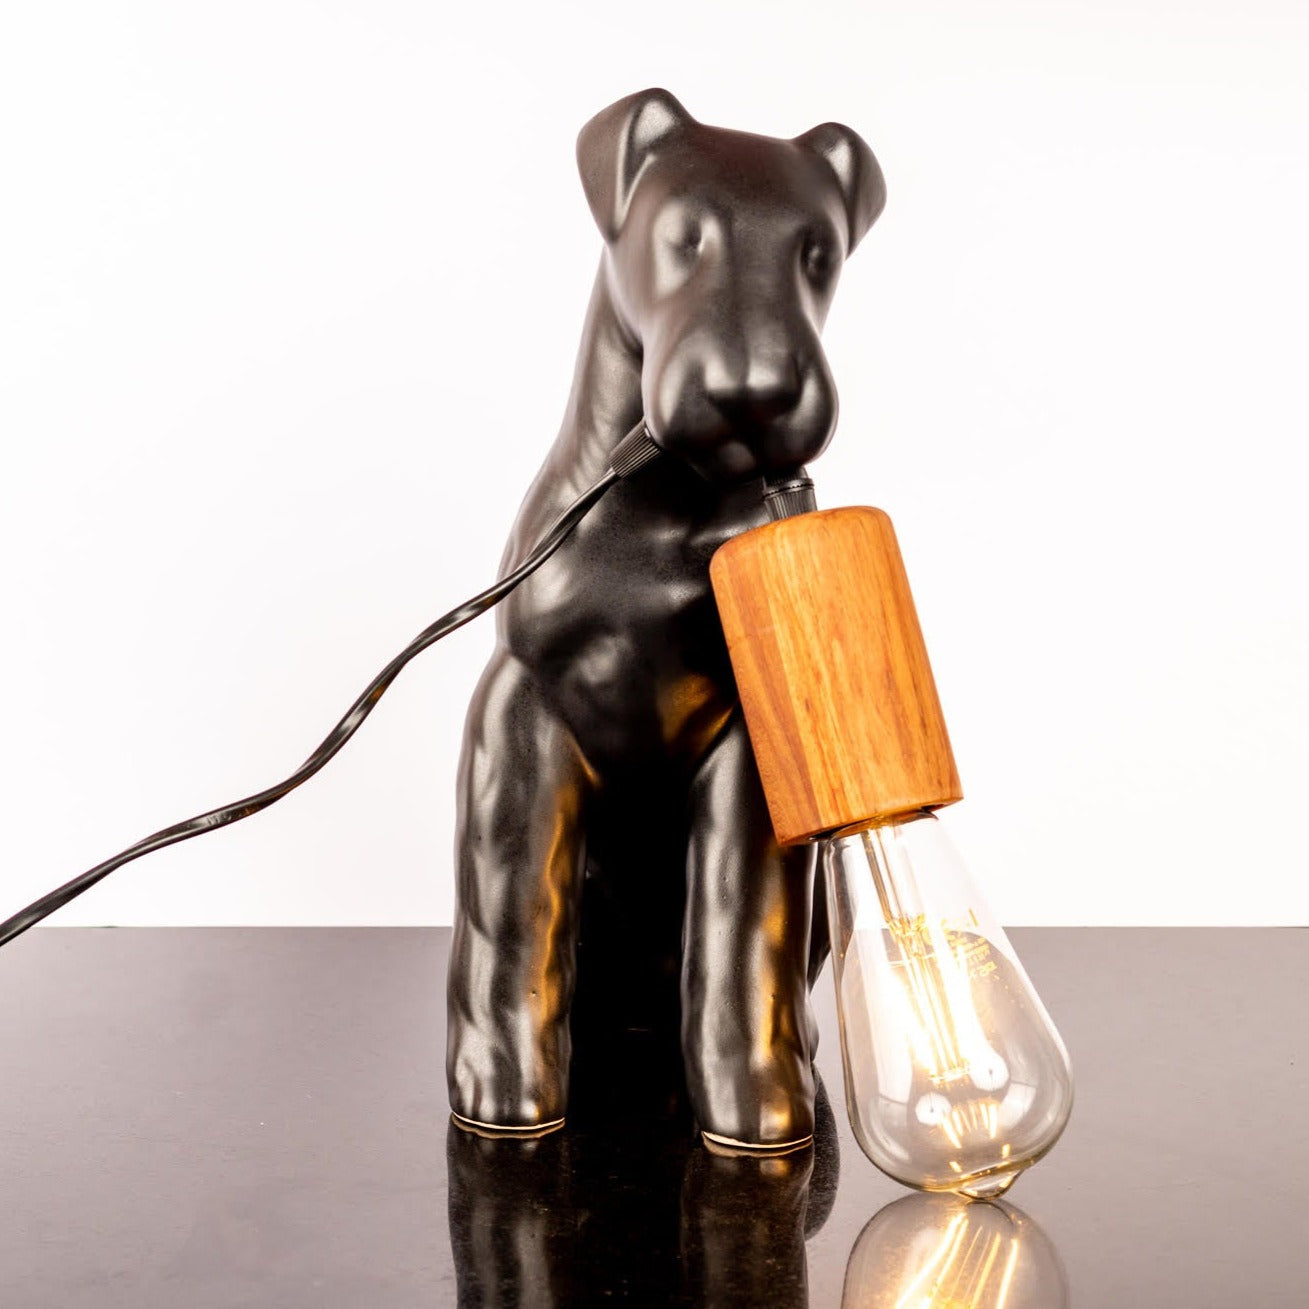 AIREDALE TABLE LAMP - Rialheim A table lamp shaped like an Airedale dog holding the bulb